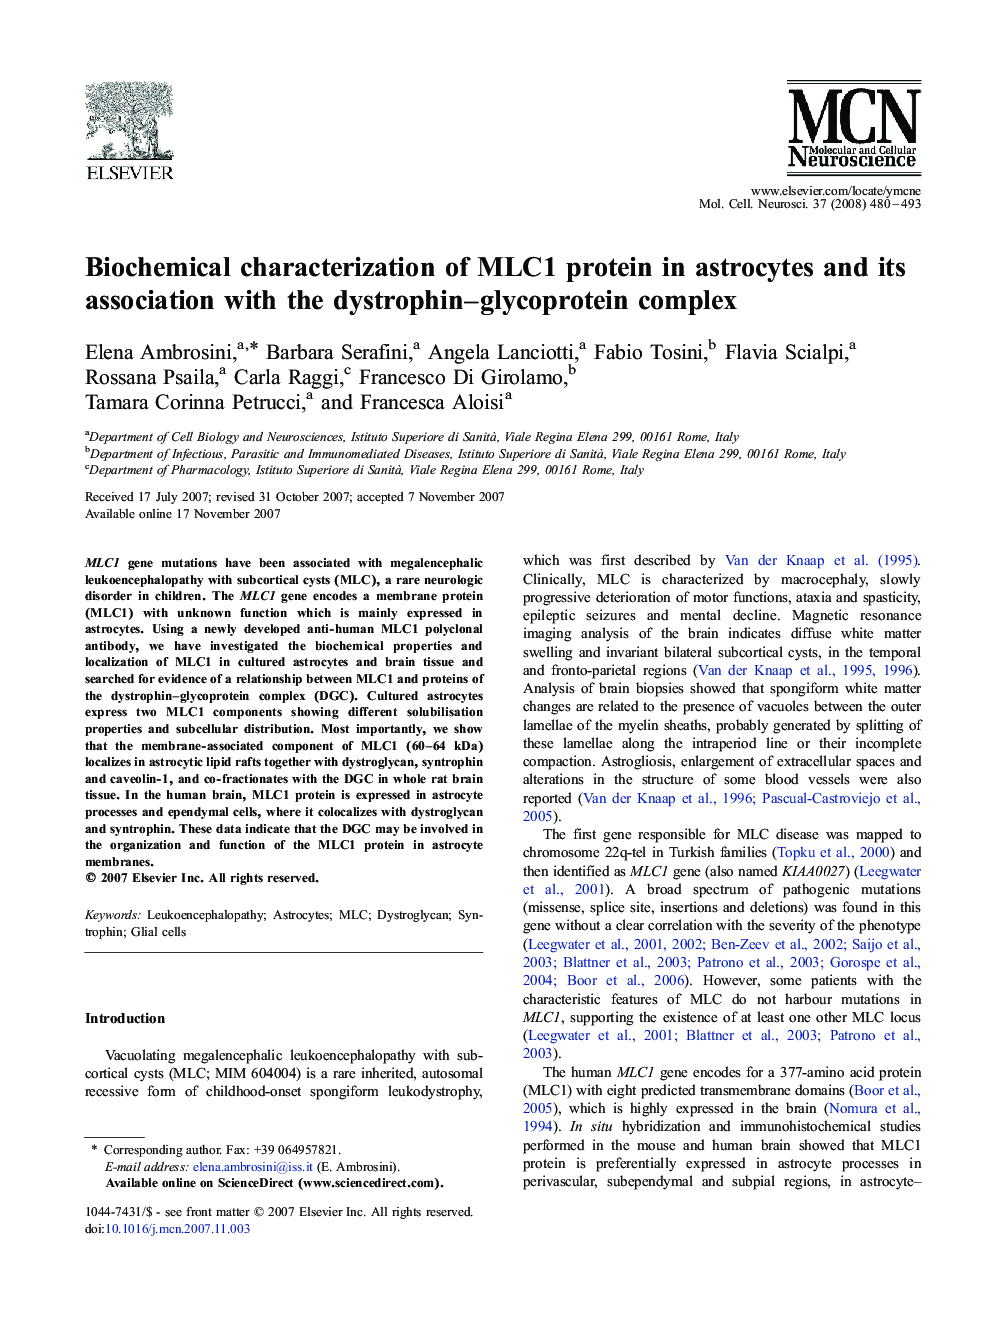 Biochemical characterization of MLC1 protein in astrocytes and its association with the dystrophin–glycoprotein complex